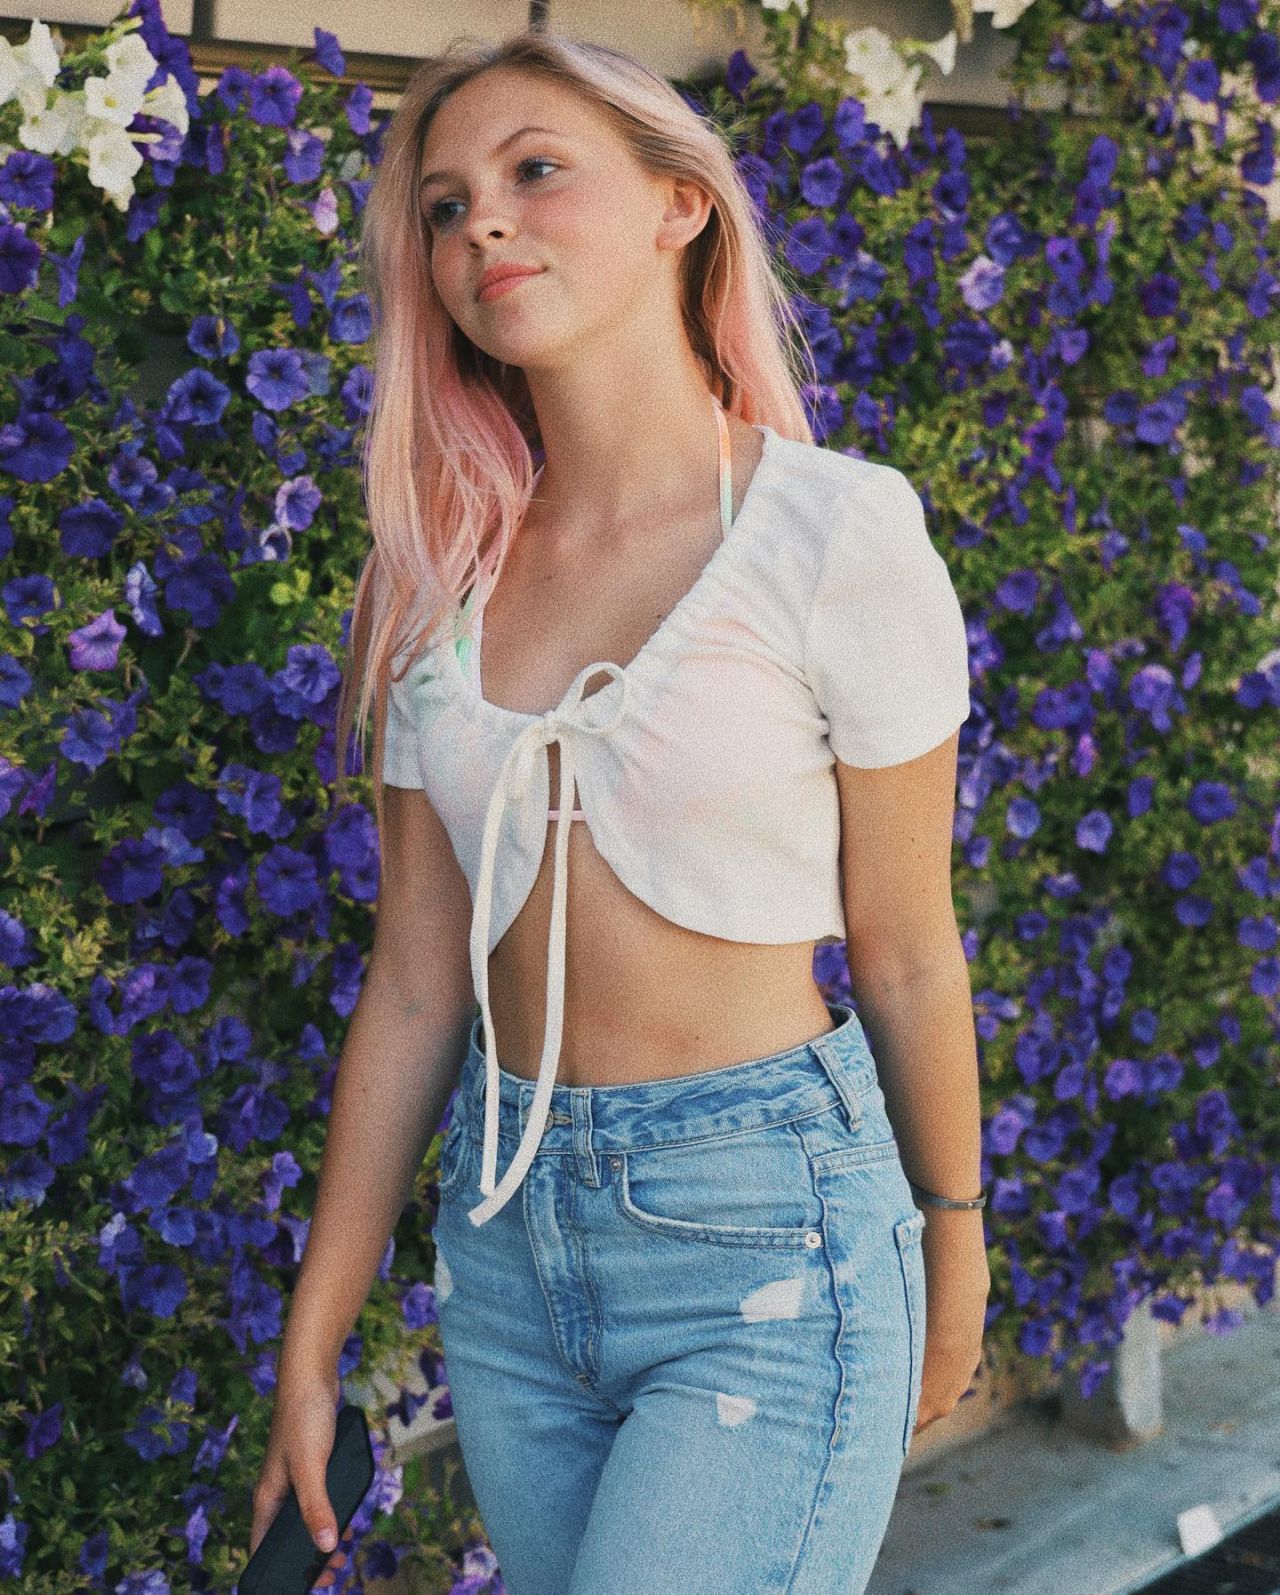 Jordyn Jones Style, Clothes, Outfits and Fashion* Page 17 of